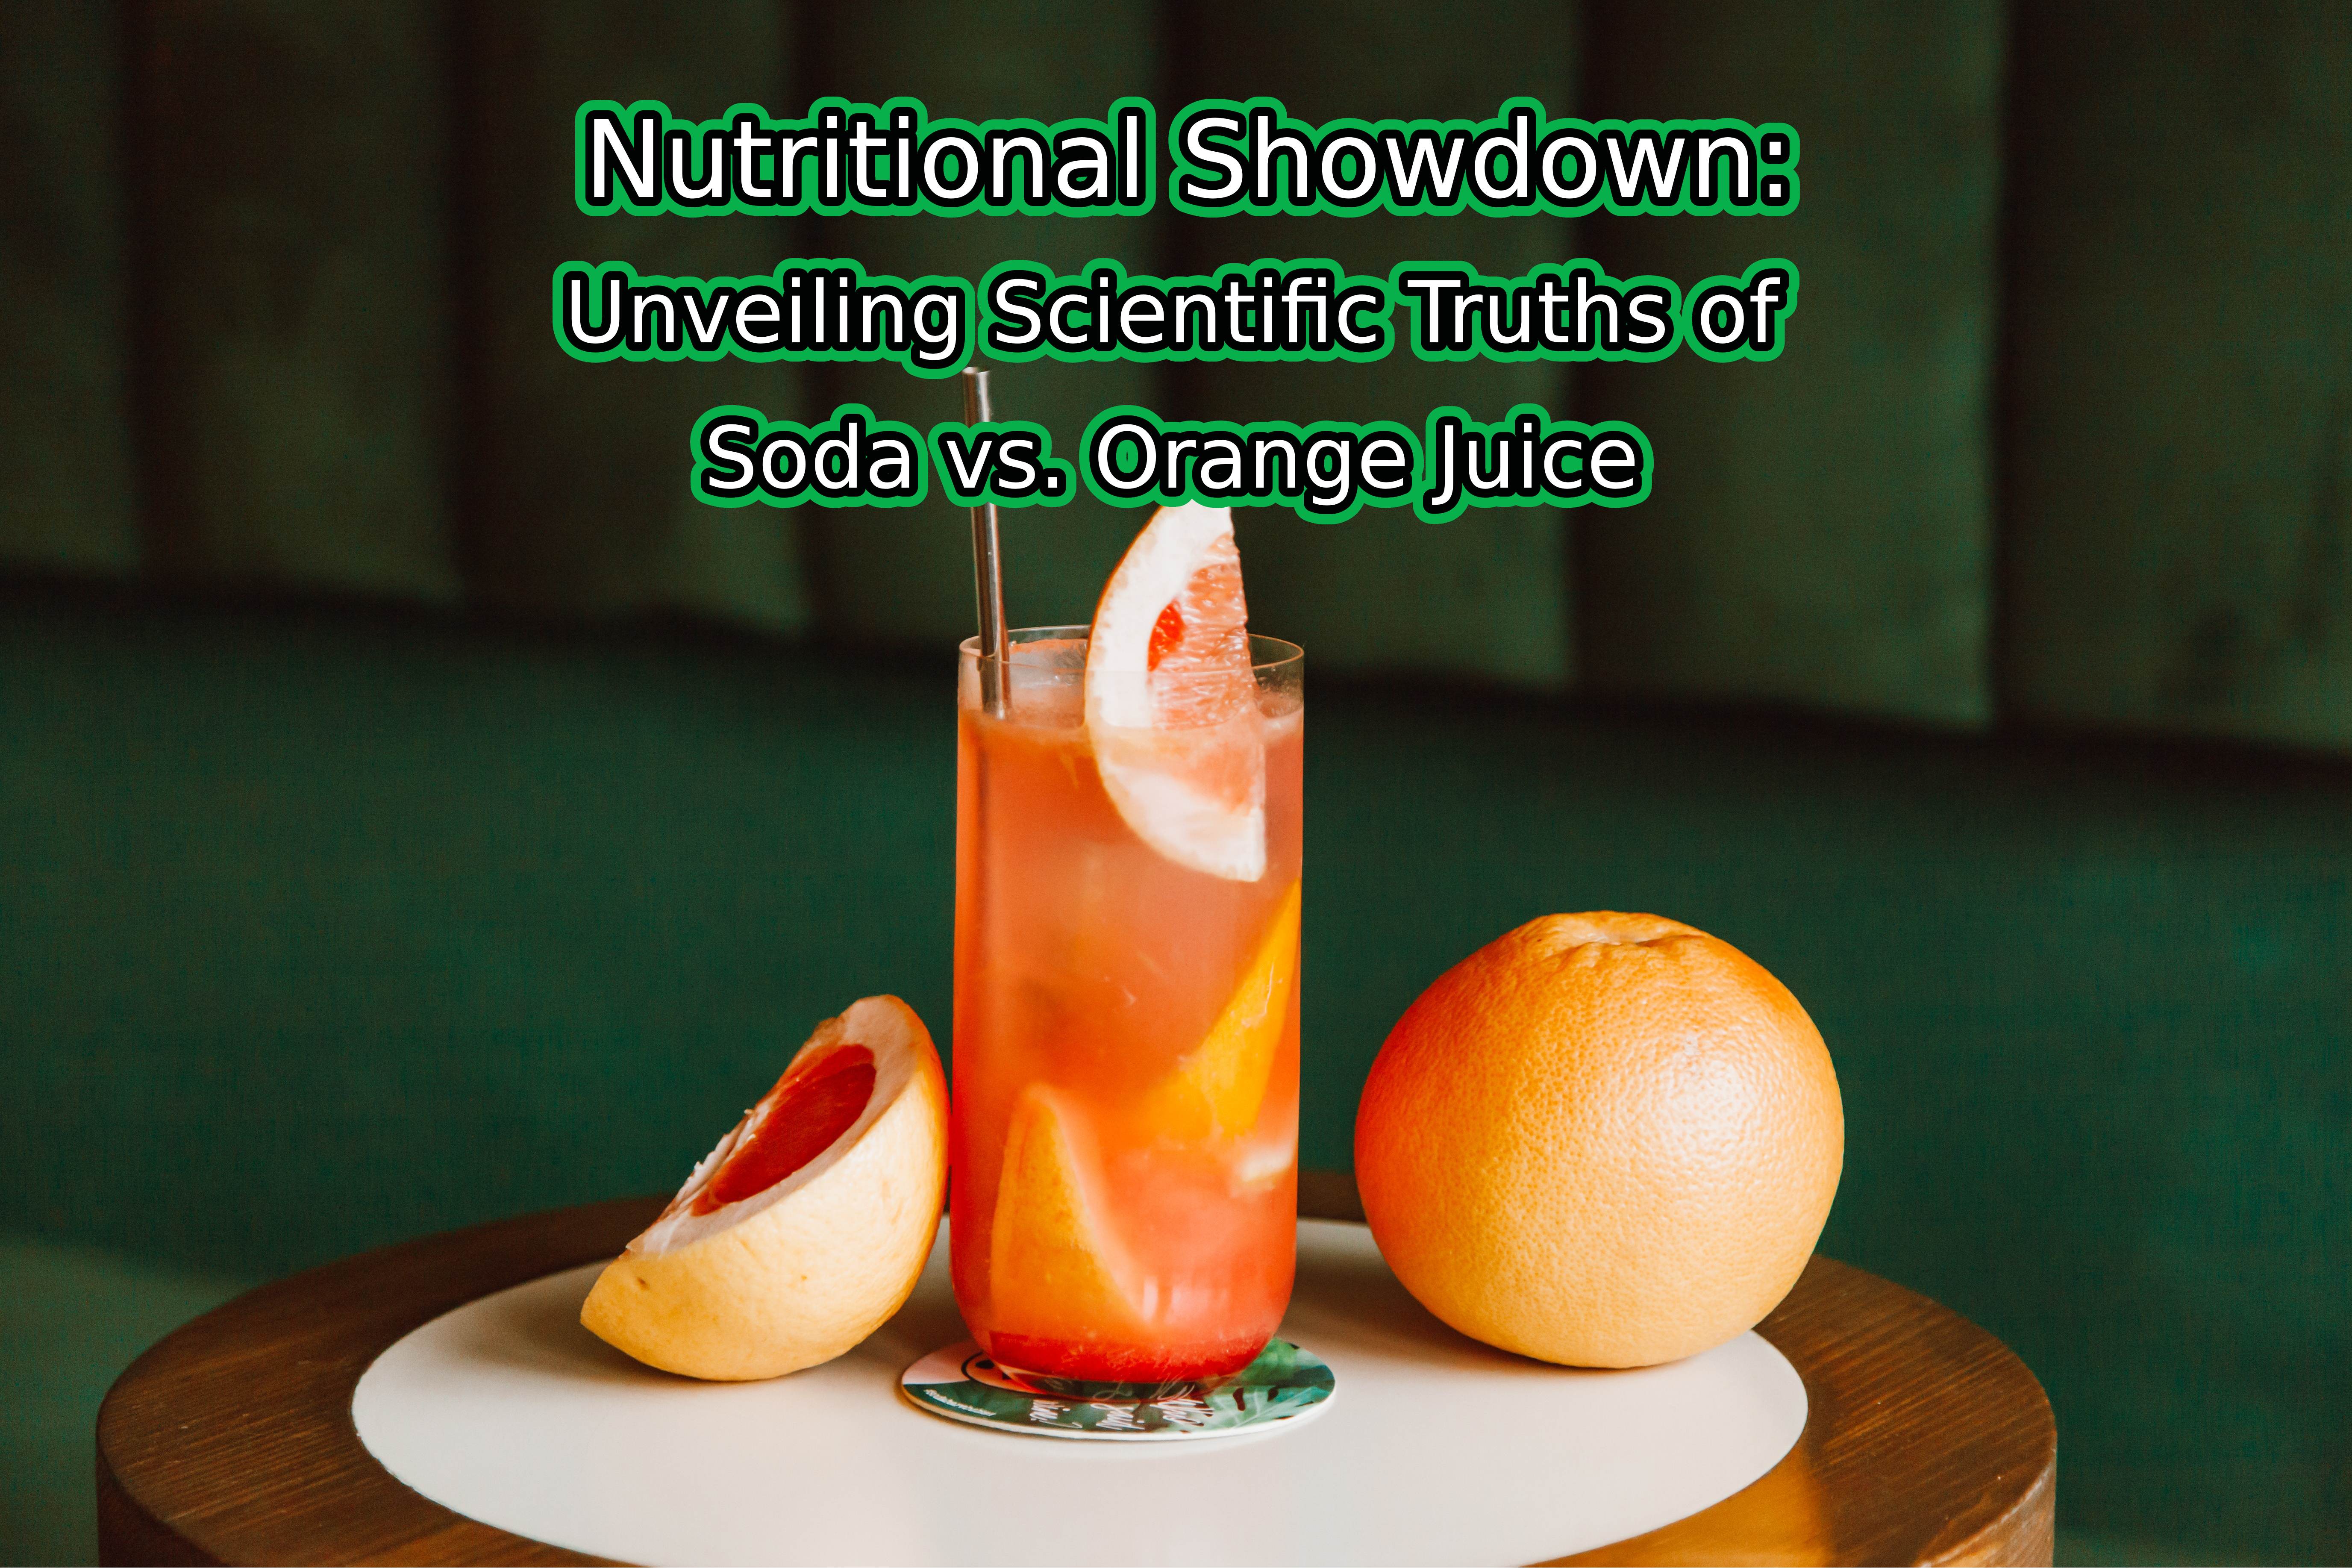 Analyzing Nutritional Content and Scientific Findings: A Comprehensive Look at Soda vs. Orange Juice